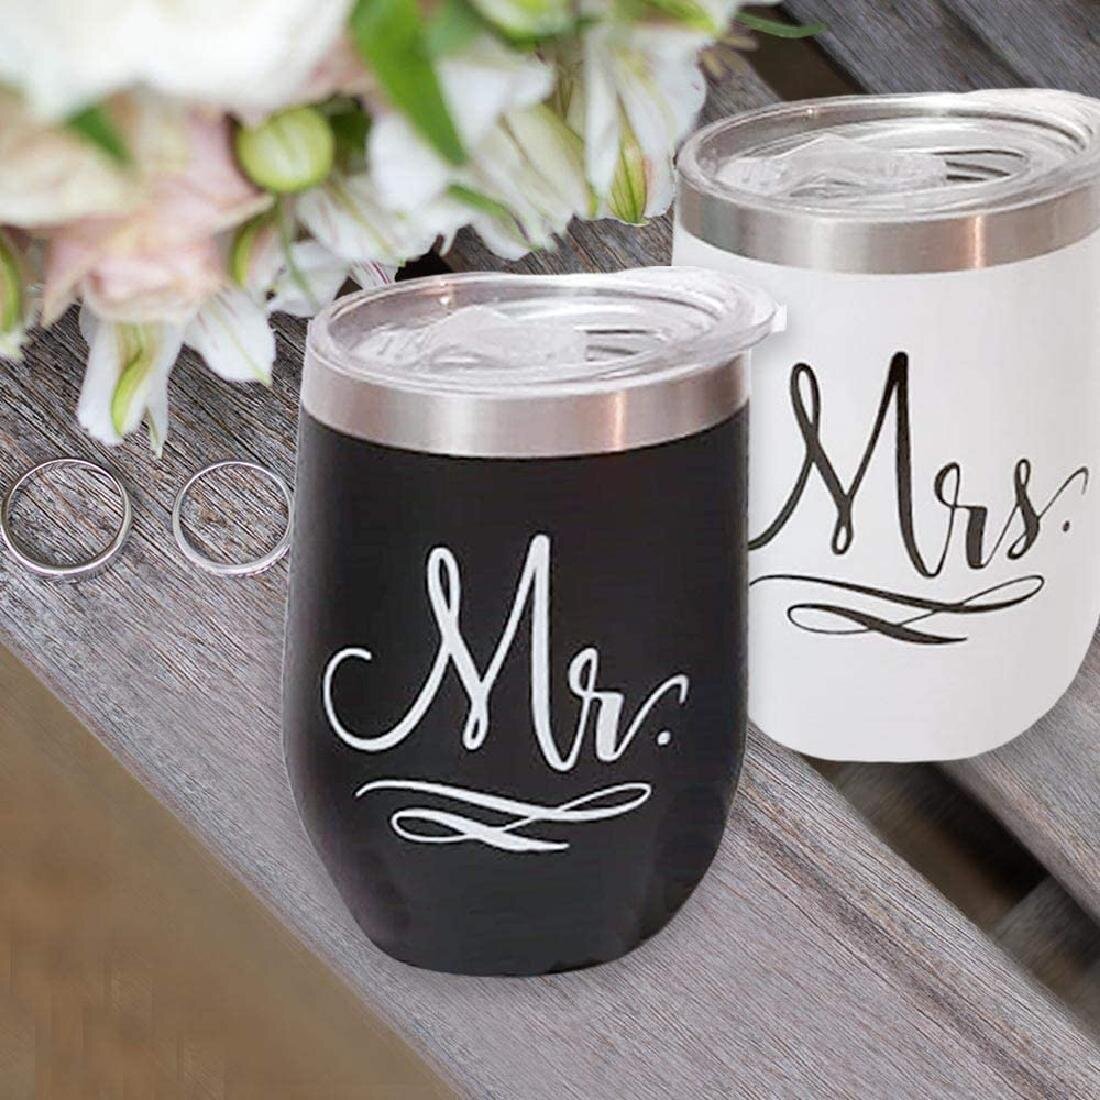 Stainless Steel Stemless Wine Tumblers Gift for Bride Wine Glass Wedding Engagement Bachelorette Party Bridal Shower Cups Bride Wine Tumbler 12 Oz 